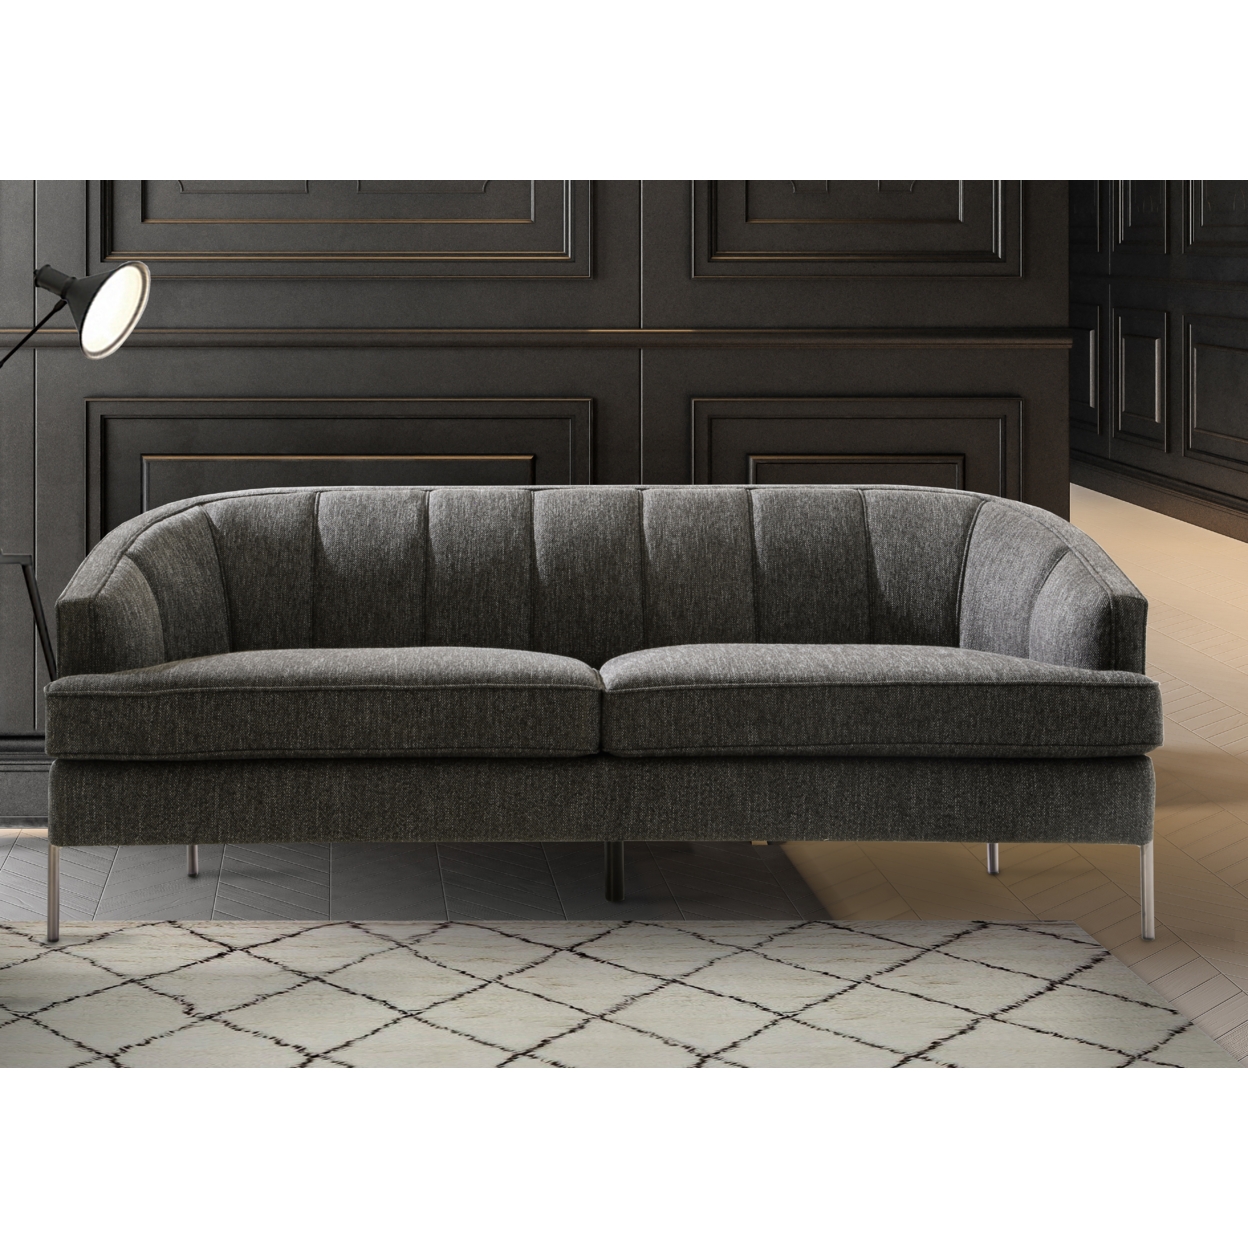 Zafrina Sofa Barrel Back 2 T-Shaped Seat Cushion Design Linen-Textured Upholstery Vertical Channel-Quilted Espresso Solid Metal Legs - Dark